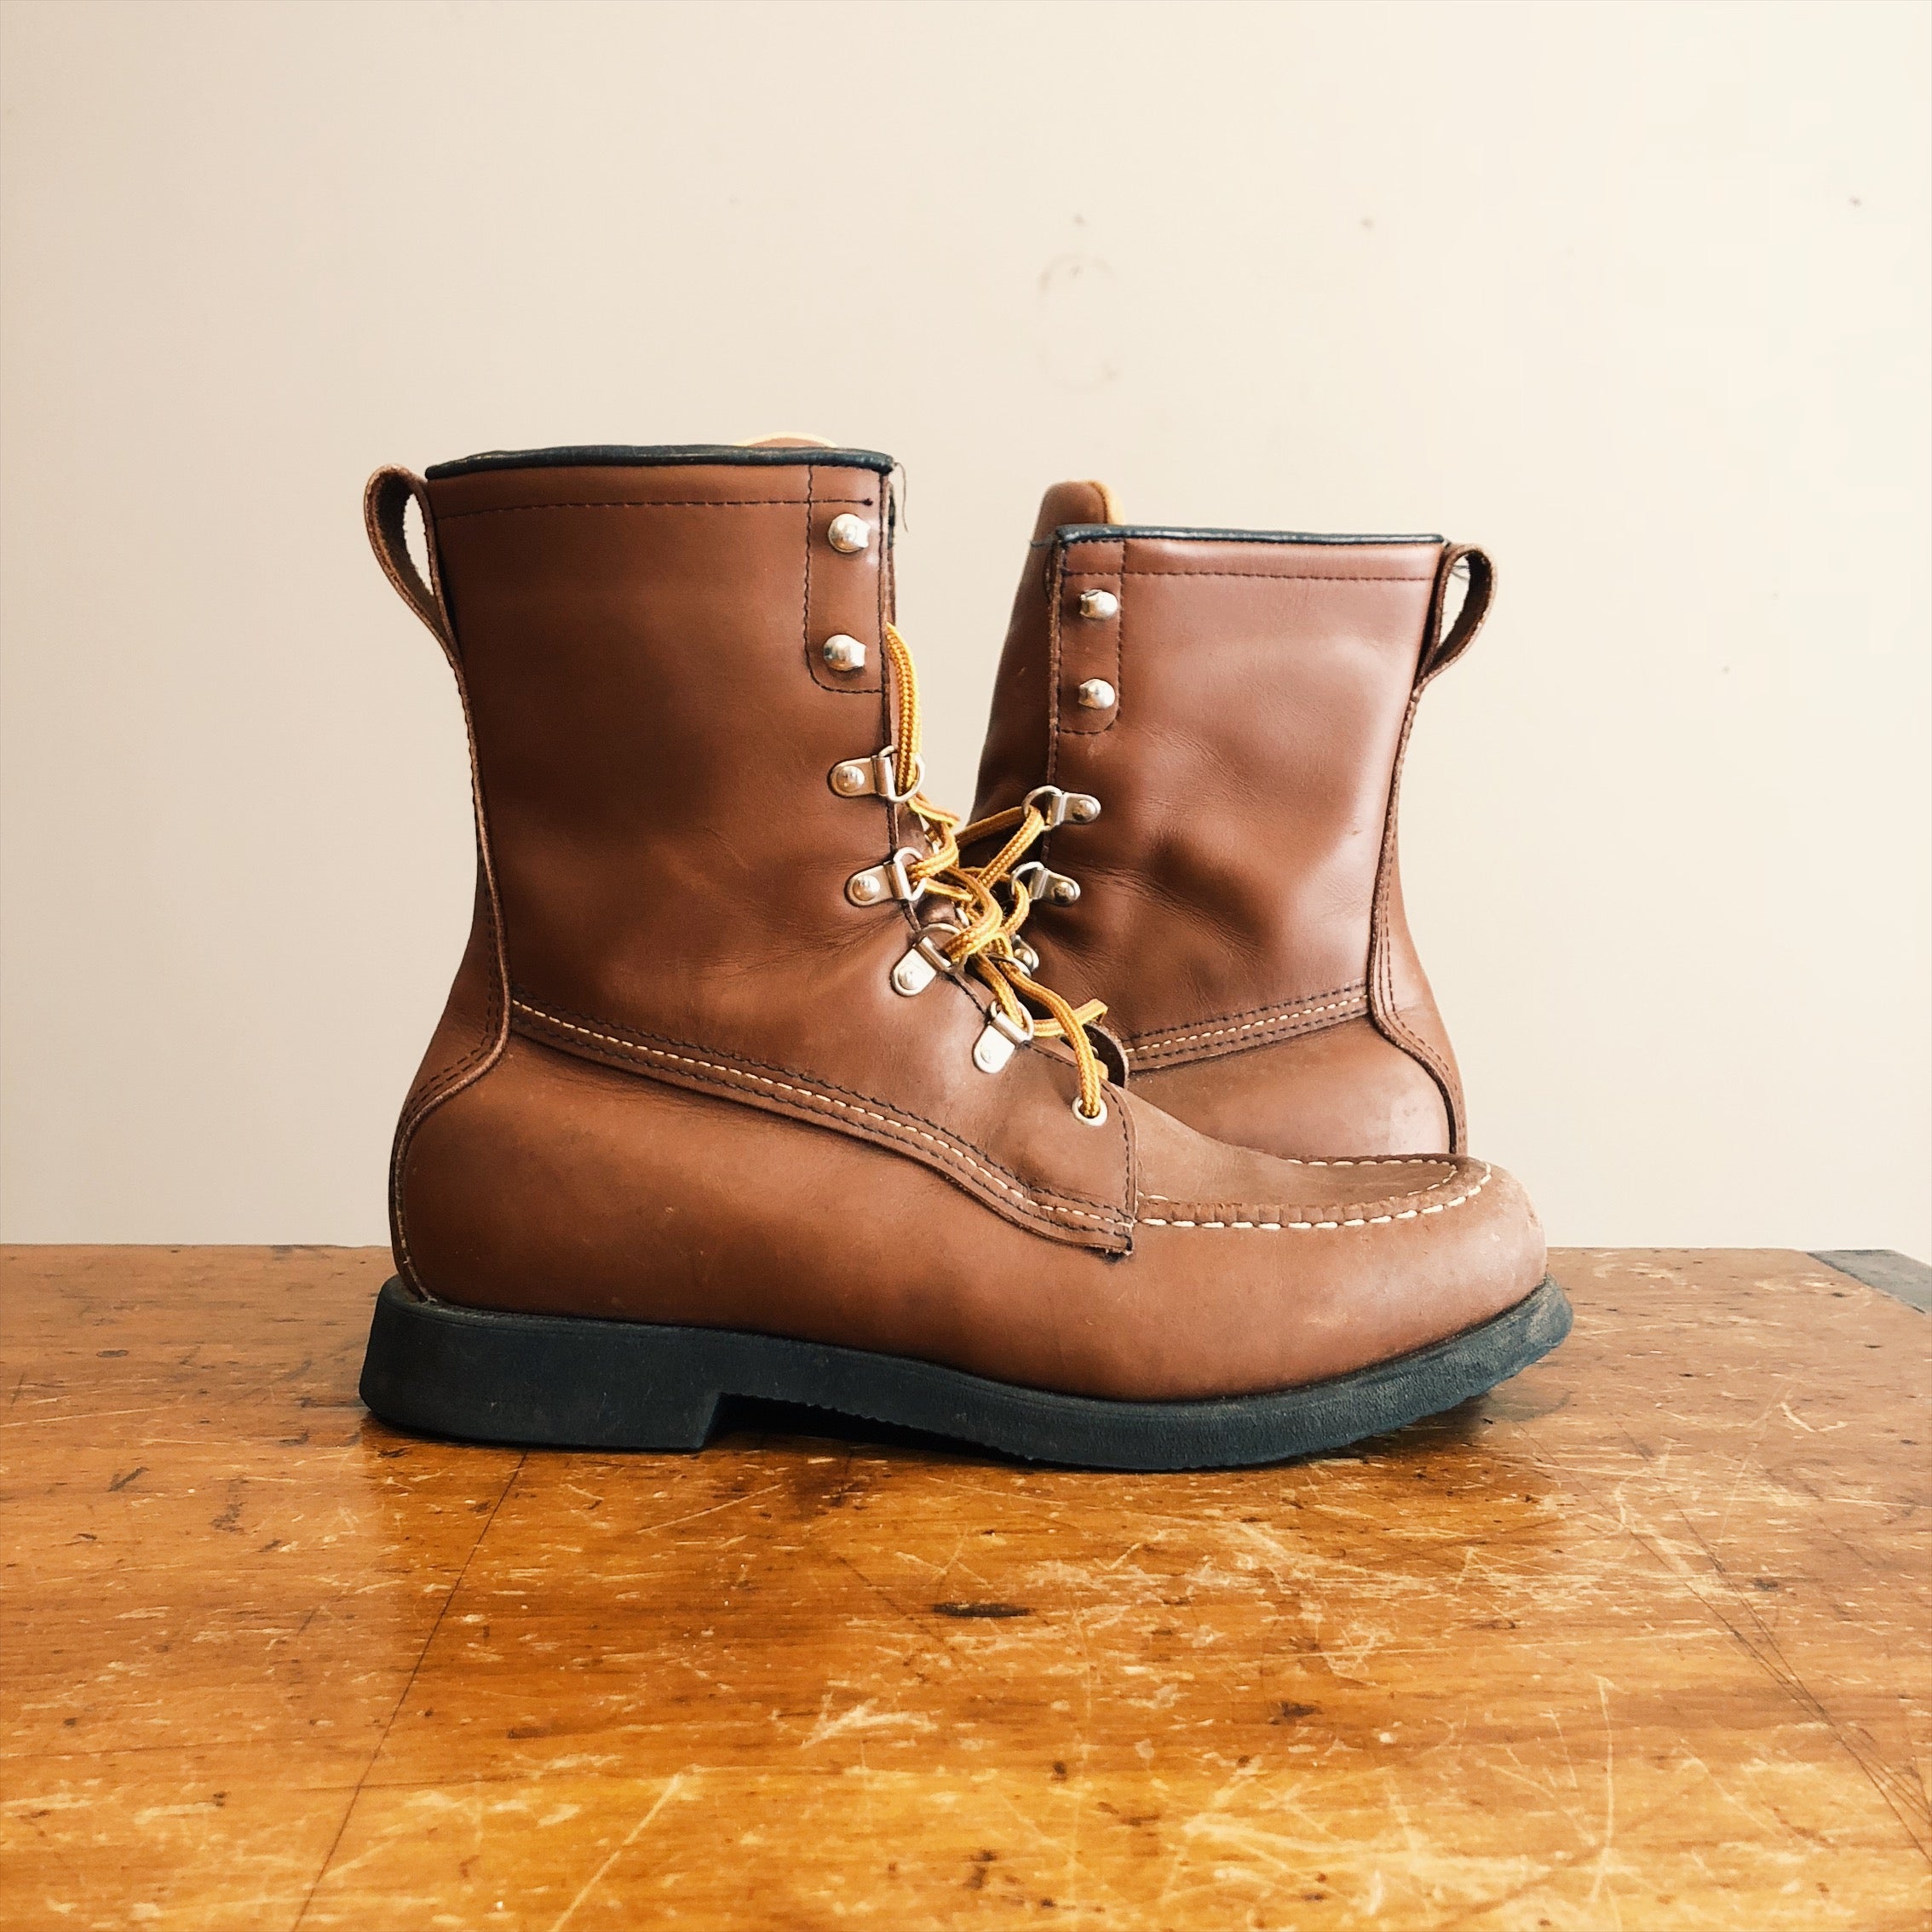 vintage hunting boots